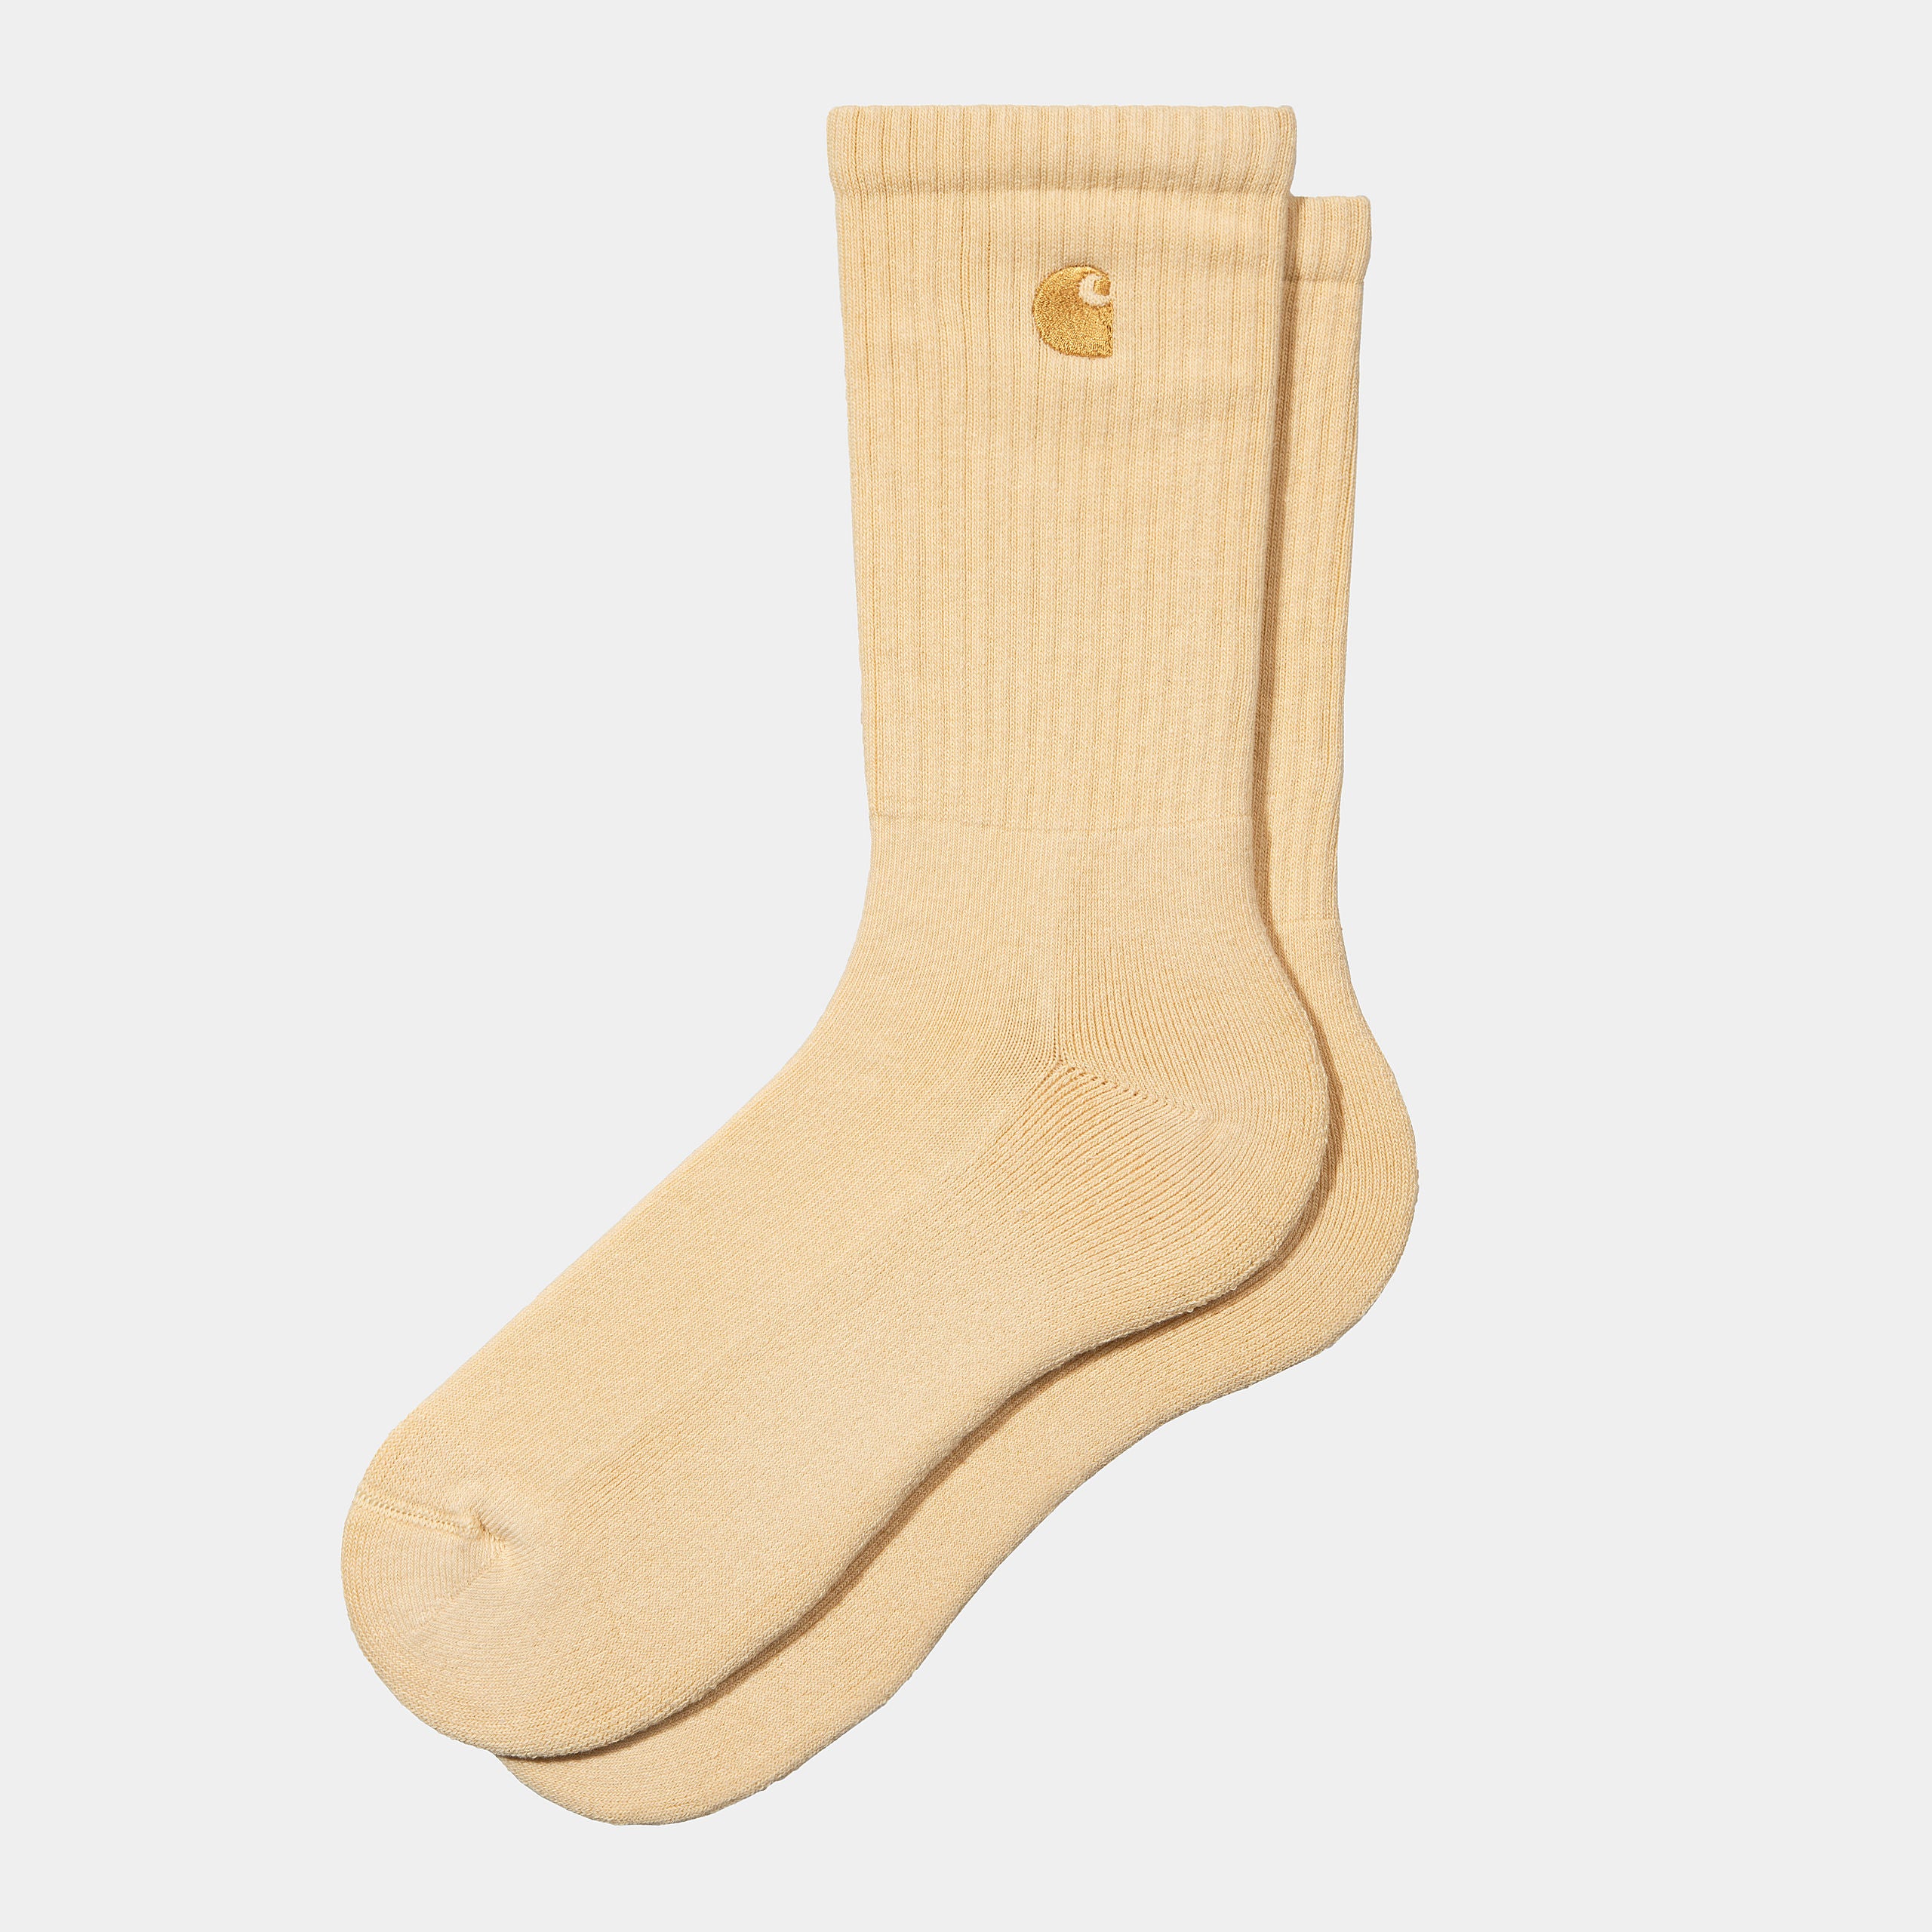 Carhartt Mens Chase Socks - Citron / Gold - The Foot Factory